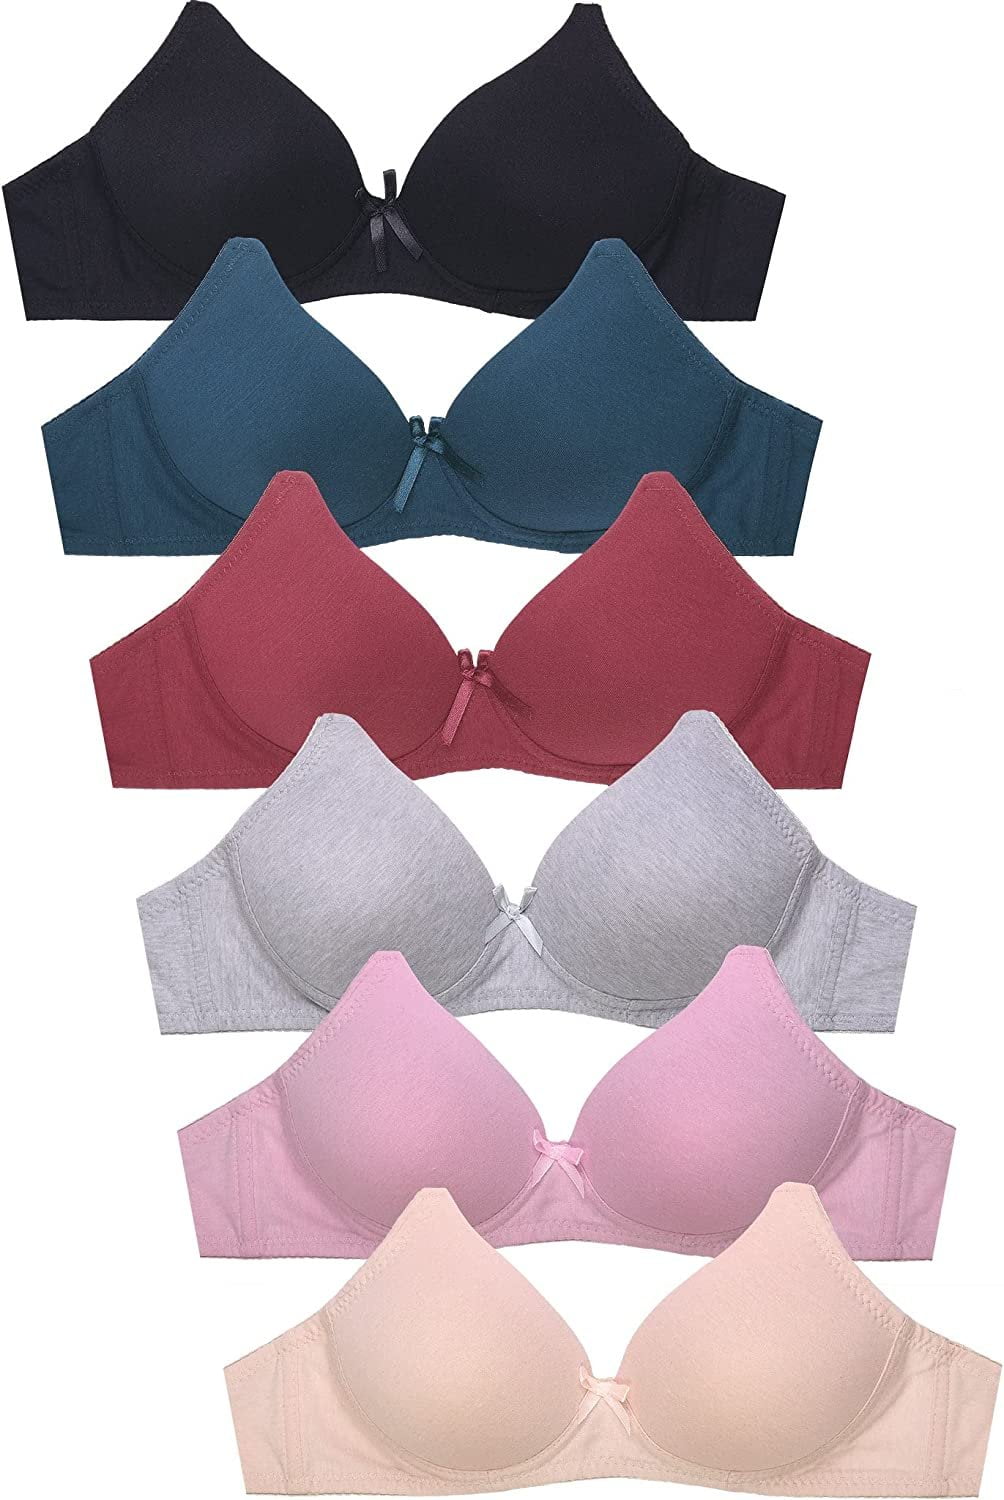 247 Frenzy Women's PACK OF 6 Assorted Color Mystery Everyday Sofra